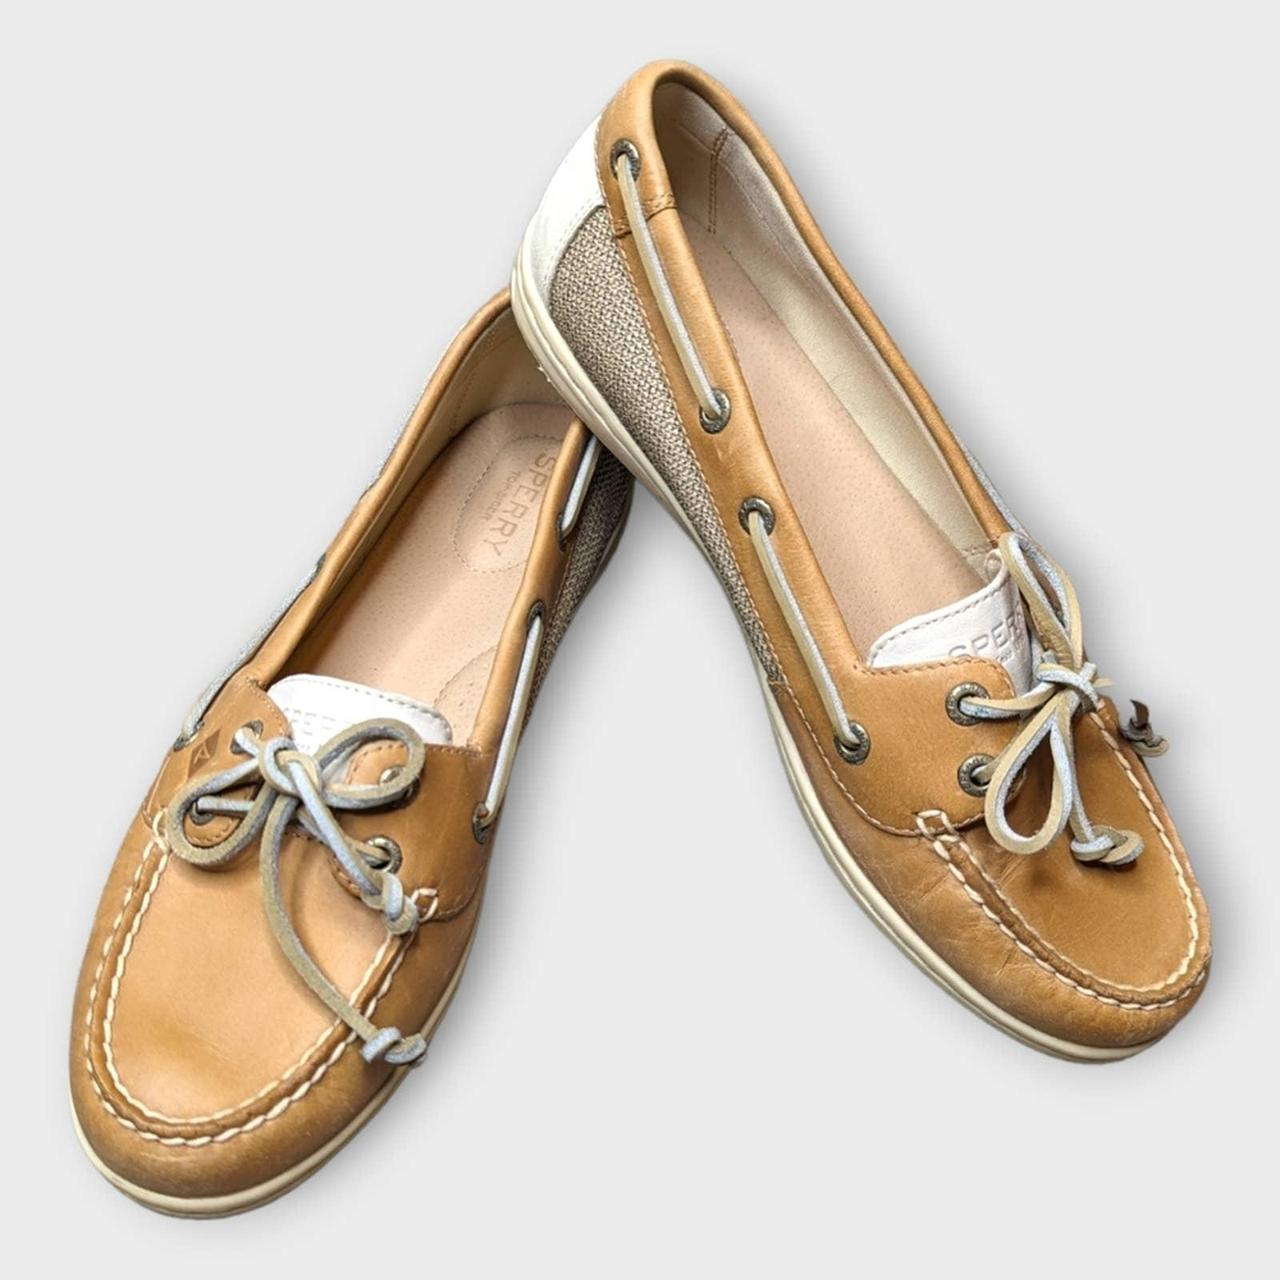 Sperry Angelfish Leather Boat Shoes